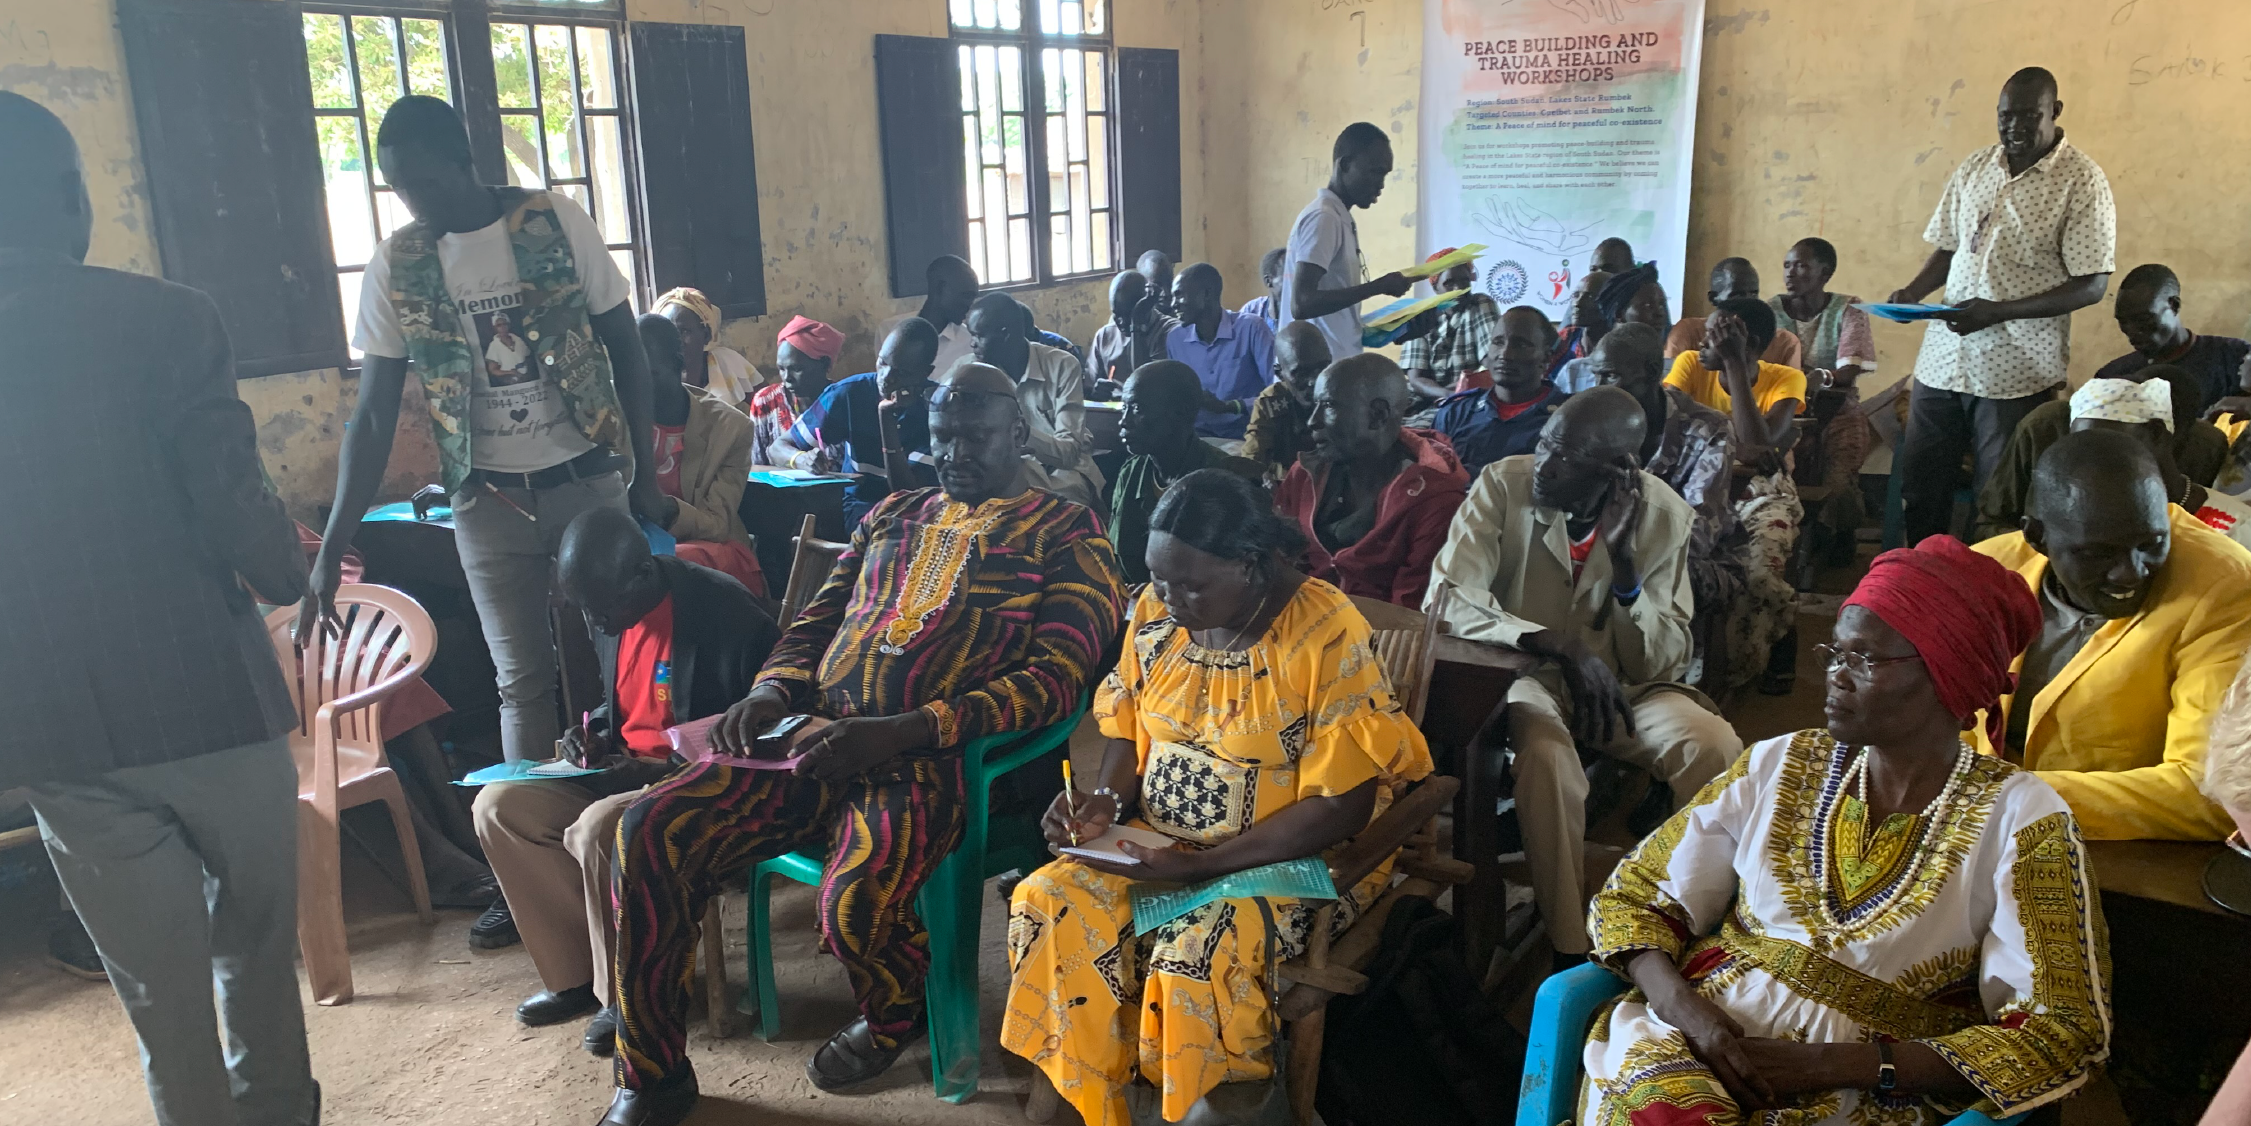 A group is gathered for a trauma and healing training session led by a local organization in partnership with MW4WSS in Cueibet County, Lake State, South Sudan.